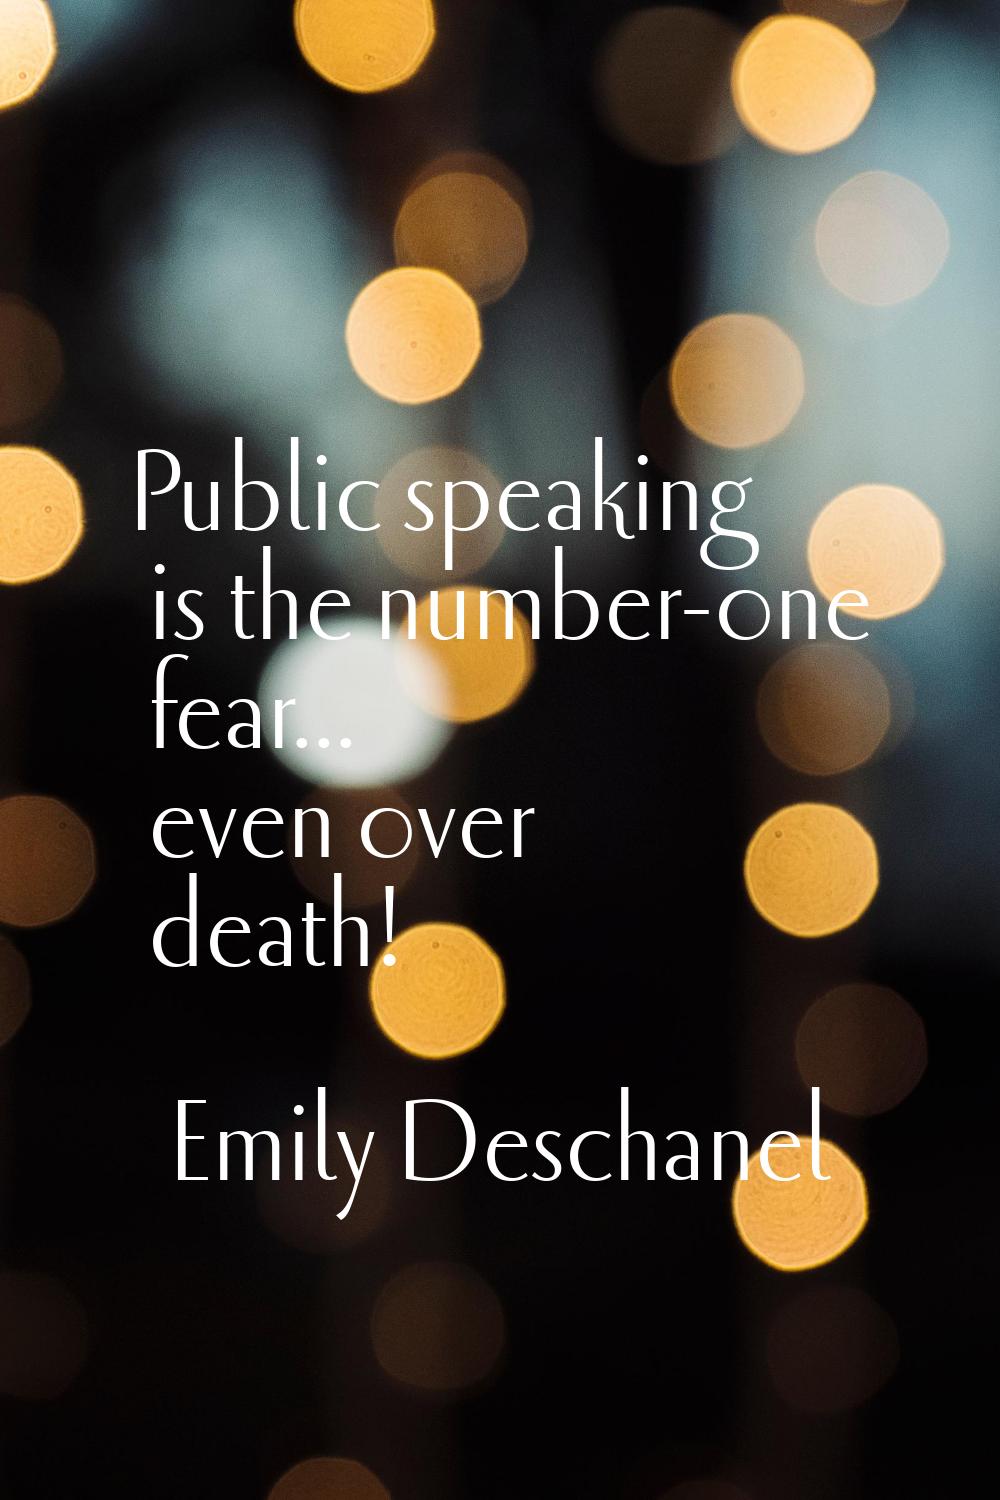 Public speaking is the number-one fear... even over death!